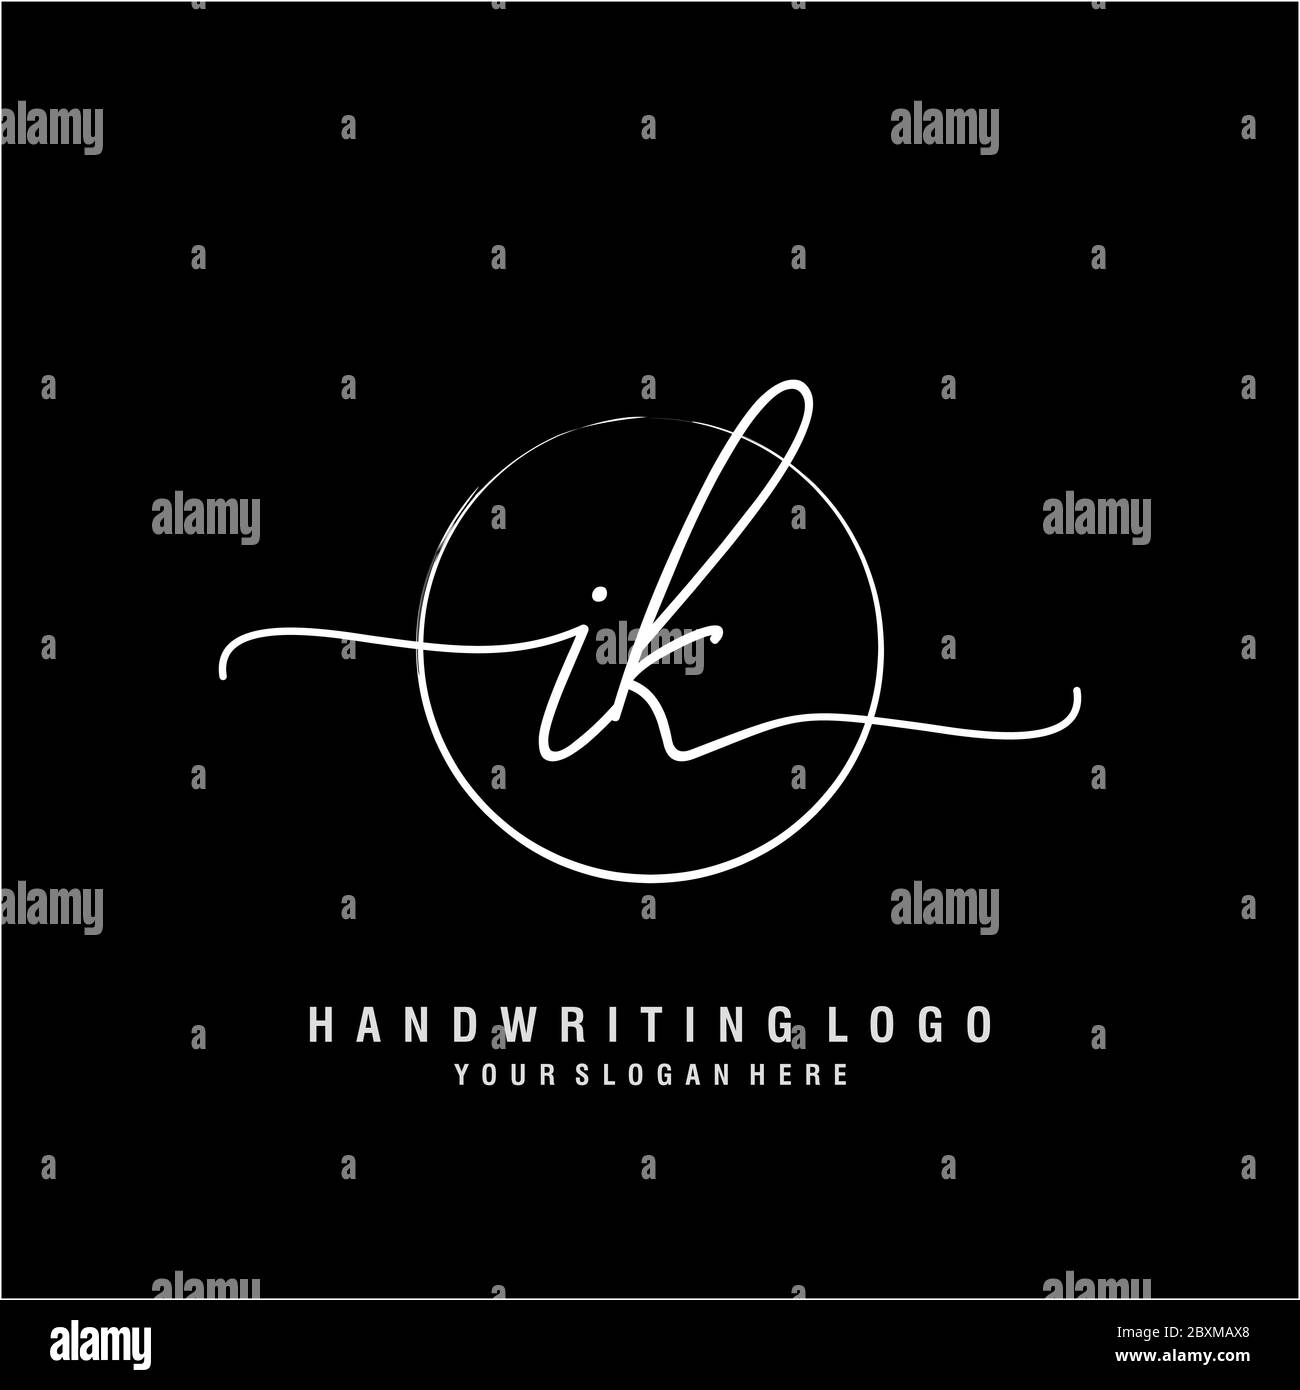 Ik Initial Handwriting Logo With Circle Hand Drawn Template Vector Stock Vector Image And Art Alamy